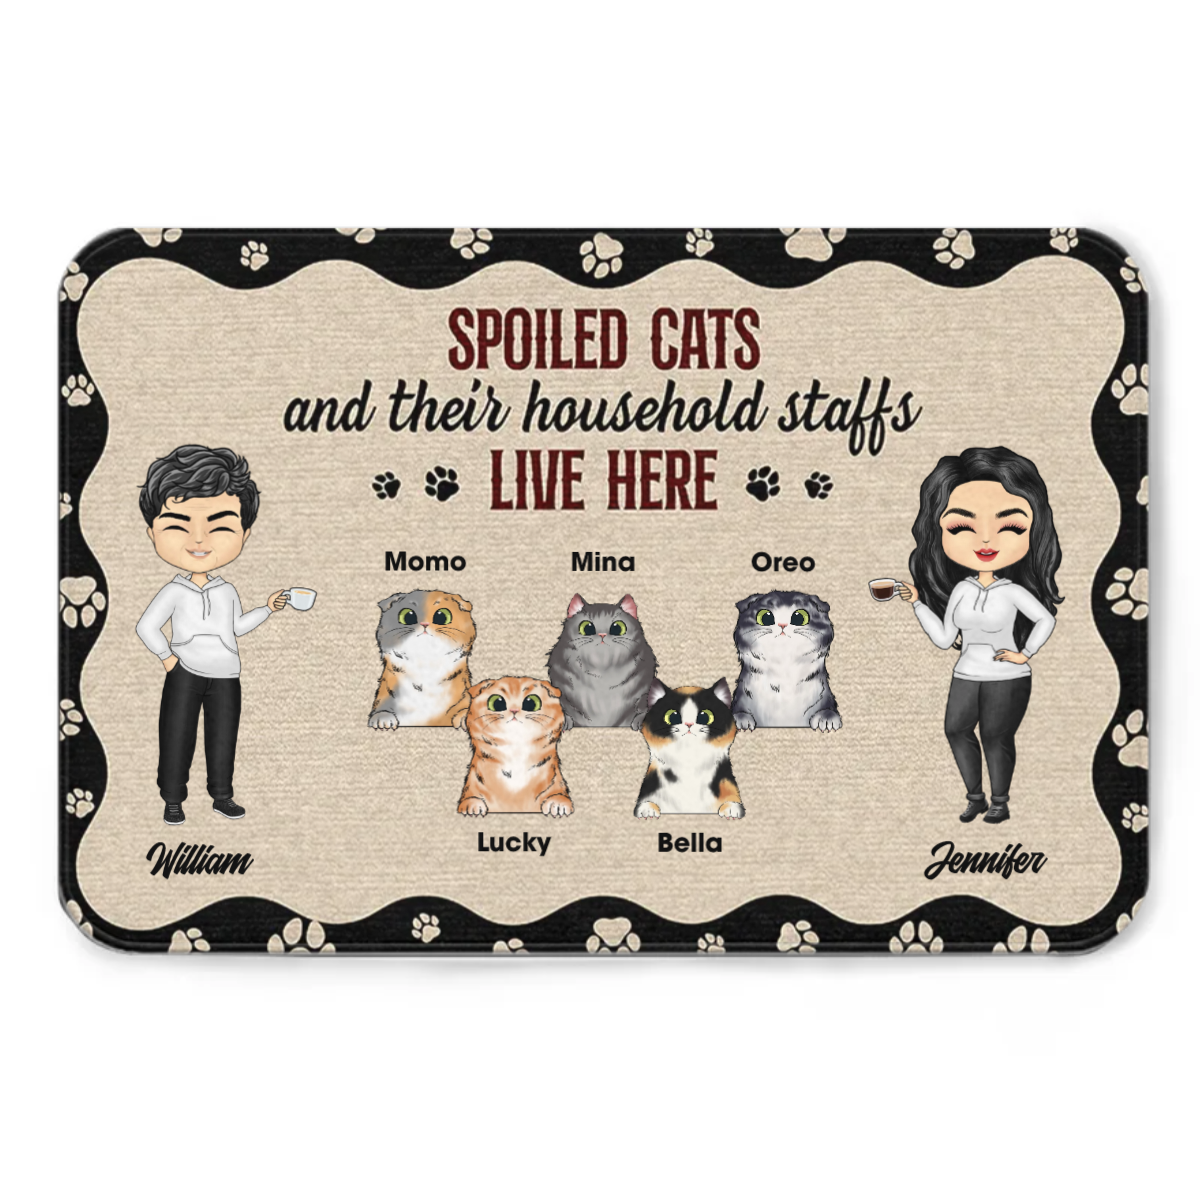 Chibi Couple And Spoiled Cats Live Here - Cat Lover Gift - Personalized Custom Doormat